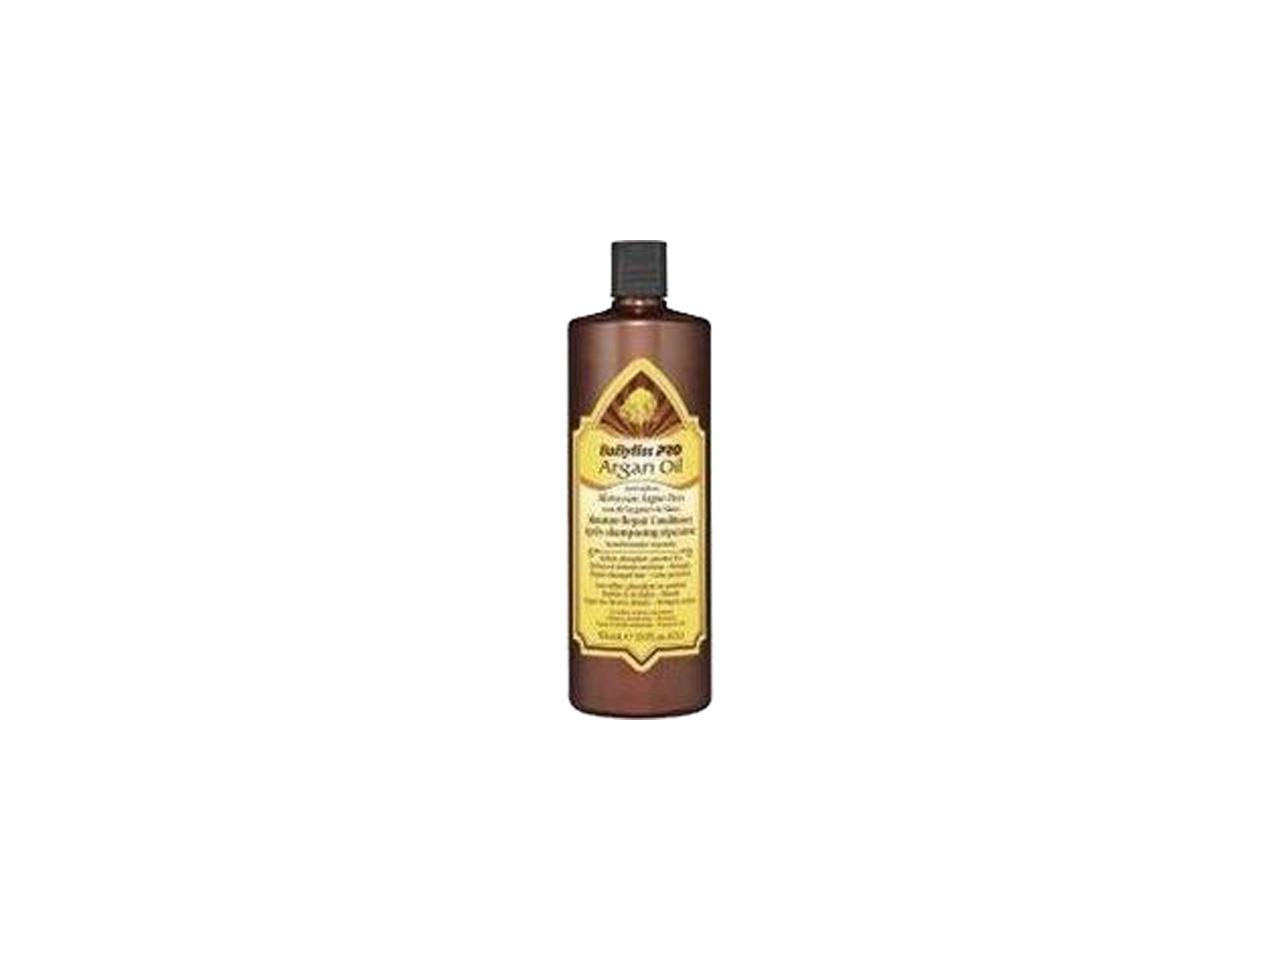 8. "One 'n Only Argan Oil Color Oasis Blue Shampoo" at Sally Beauty - wide 9